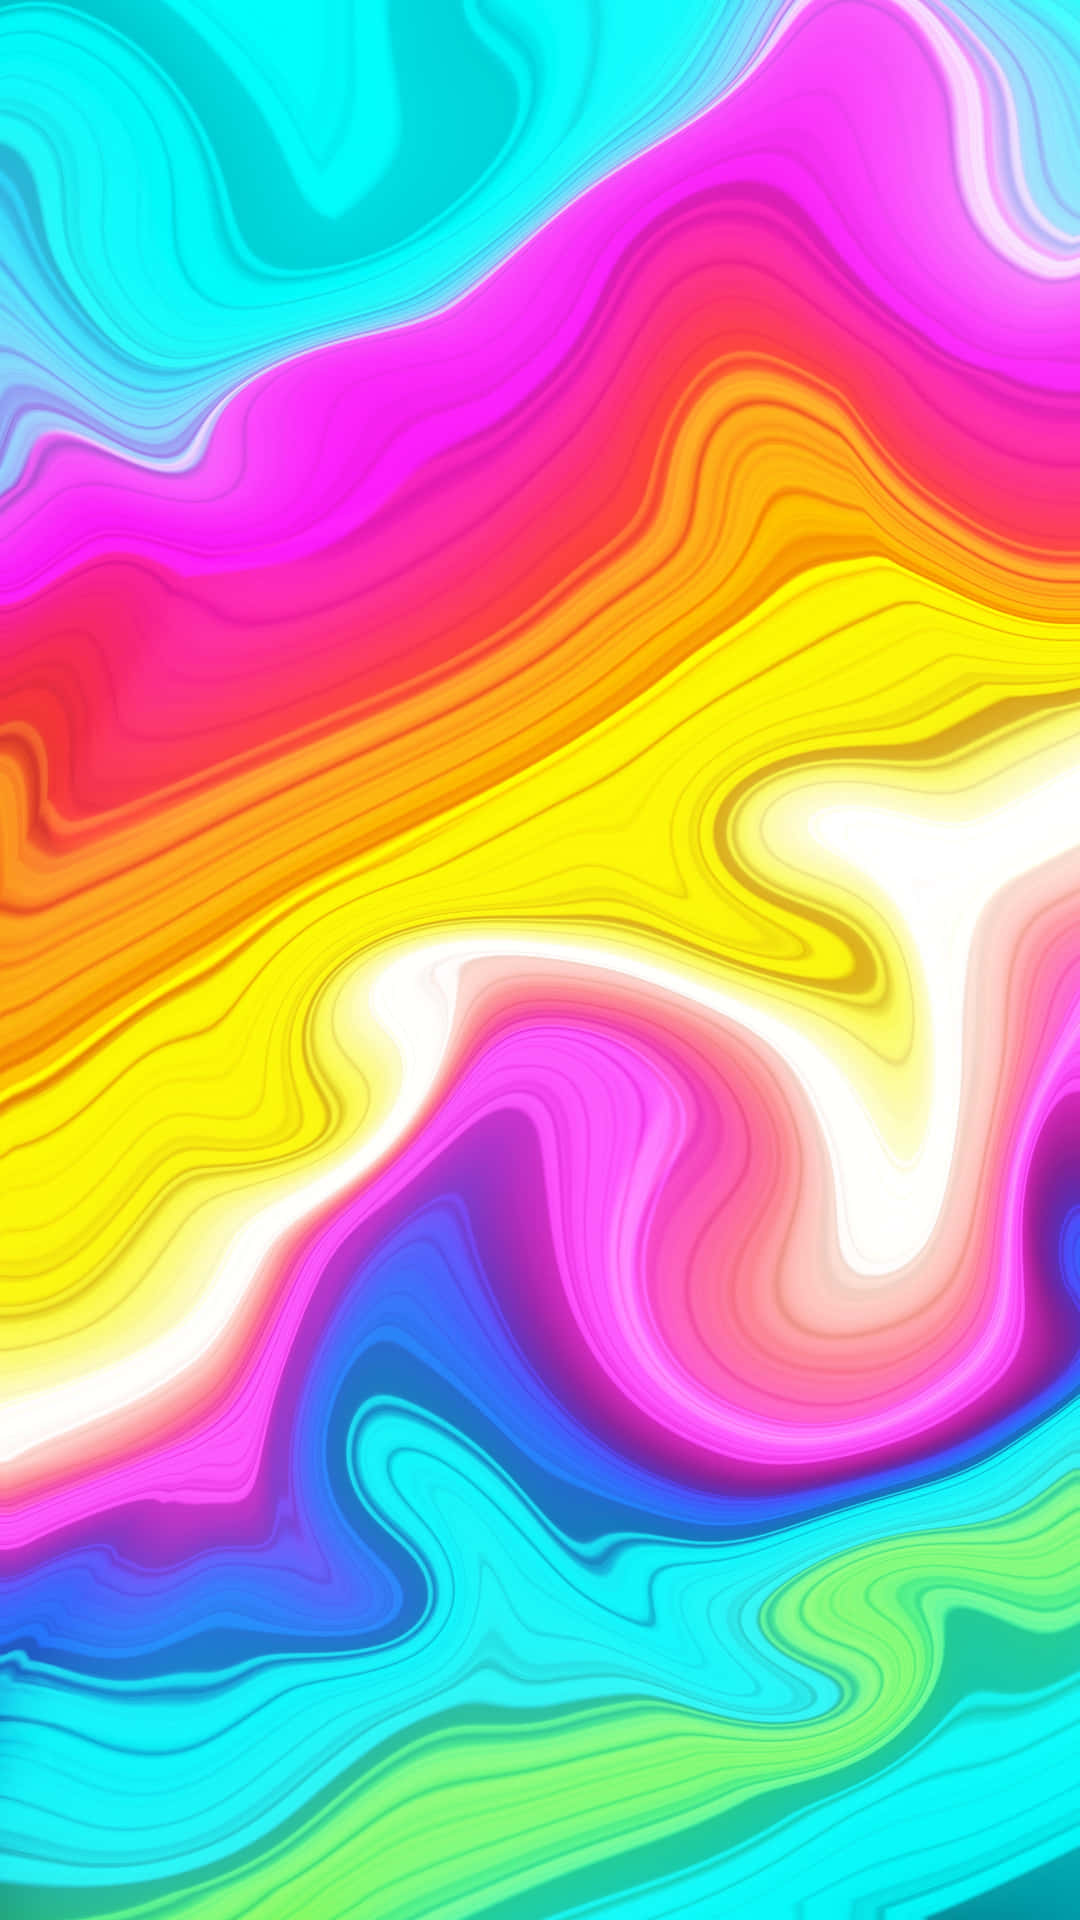 A vivid and eye-catching neon color background